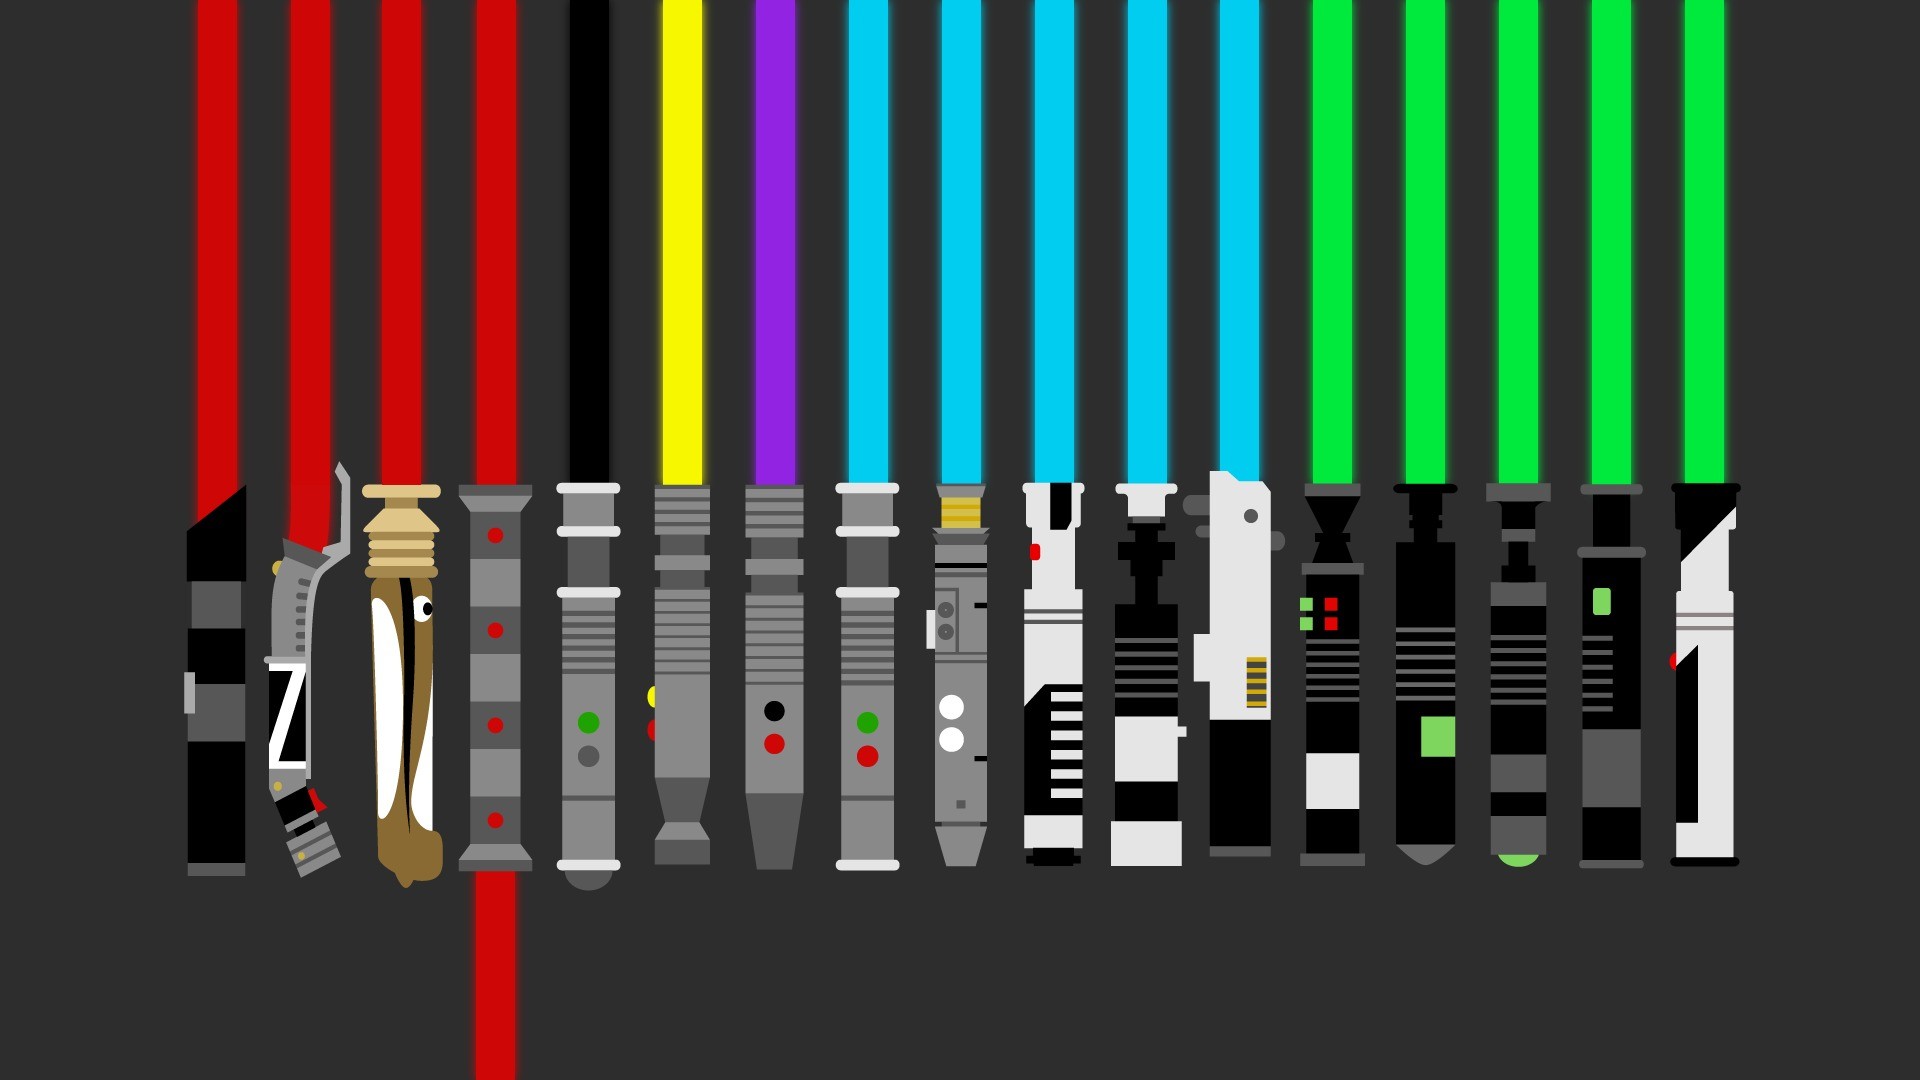 1920x1080 Vectored this lightsaber wallpaper - more info and resolutions in the  description (x-post /r/StarWars)